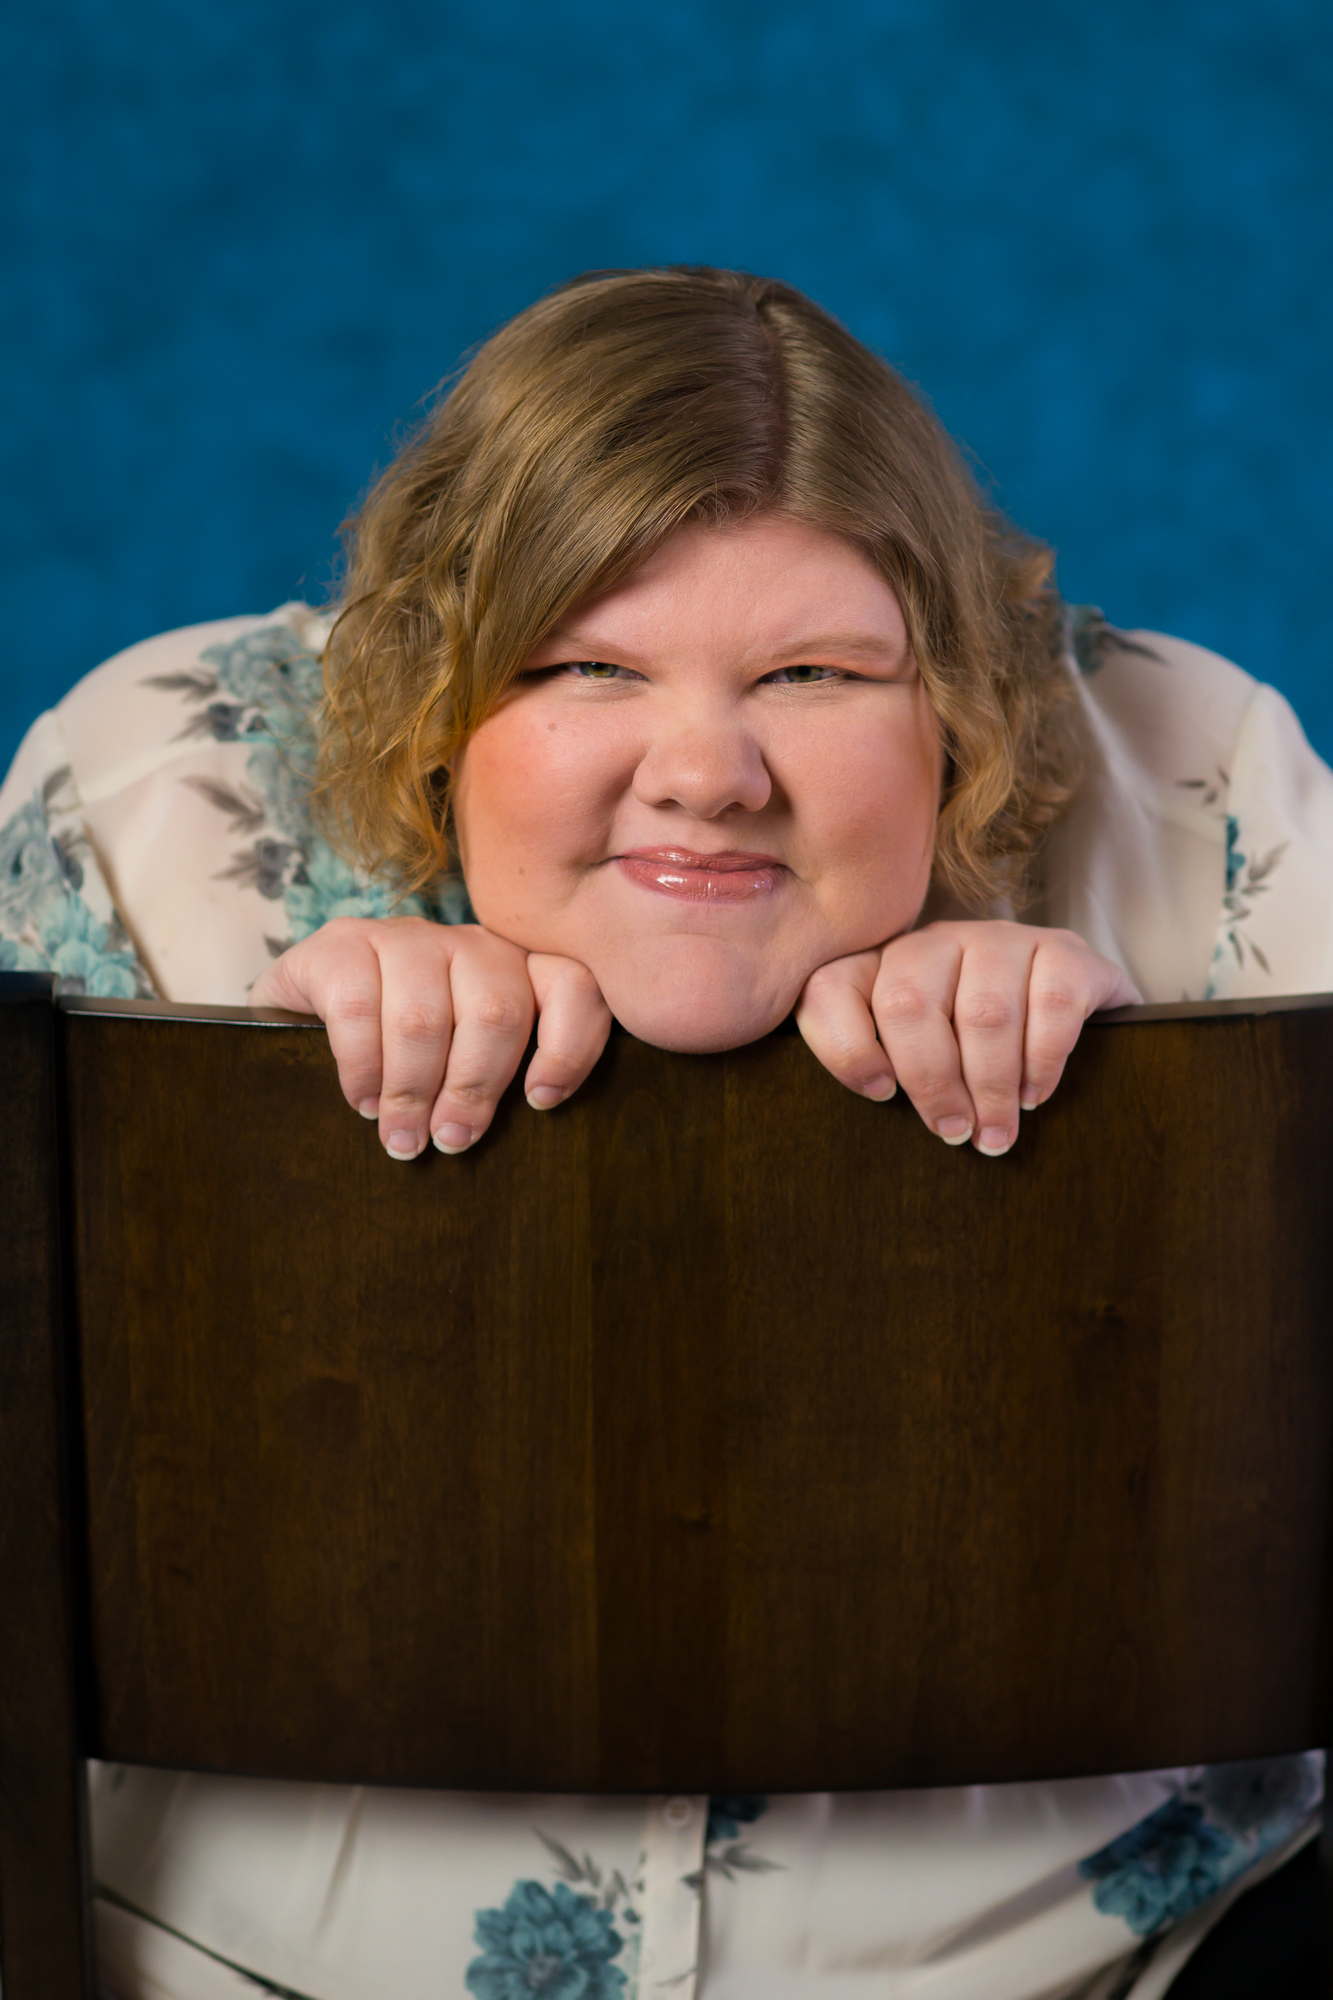 A fat woman looks at the camera playfully while posing over the back of a chair